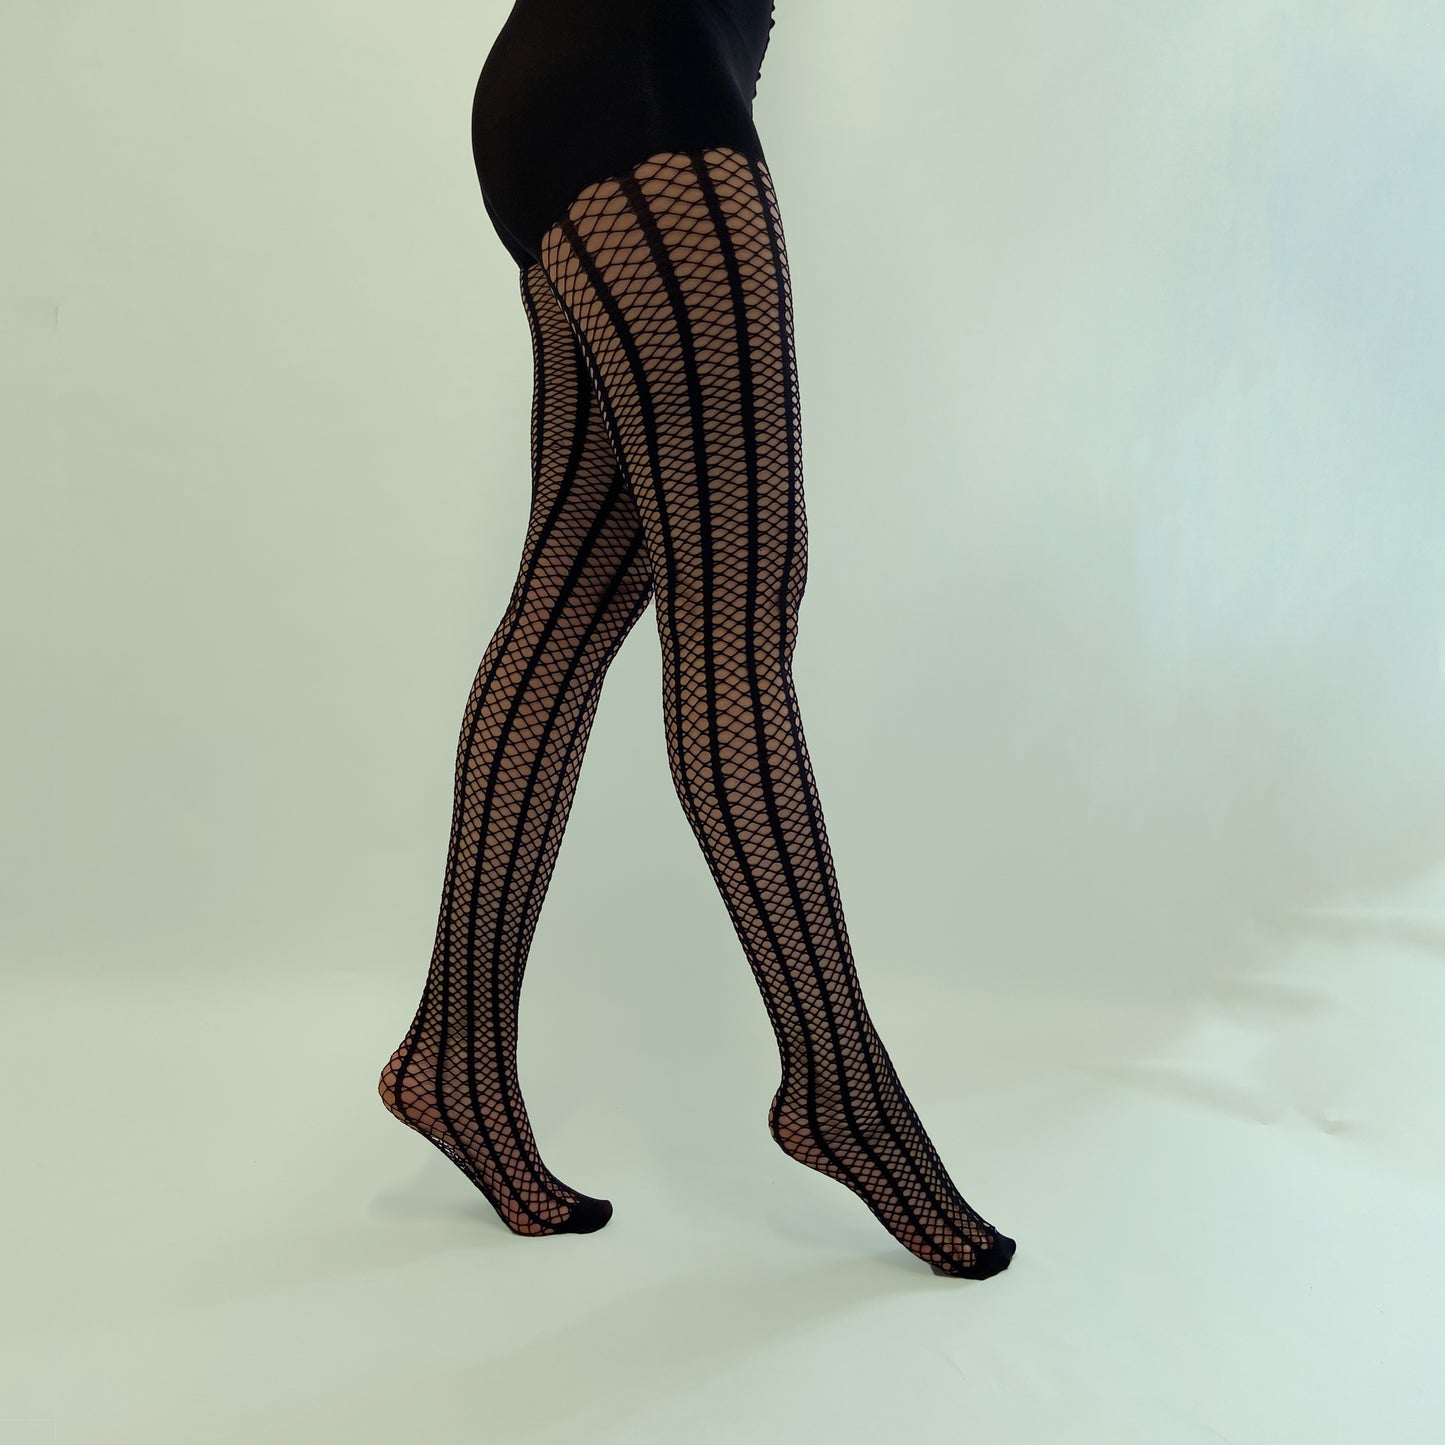 Directional Net Tights – Better Tights